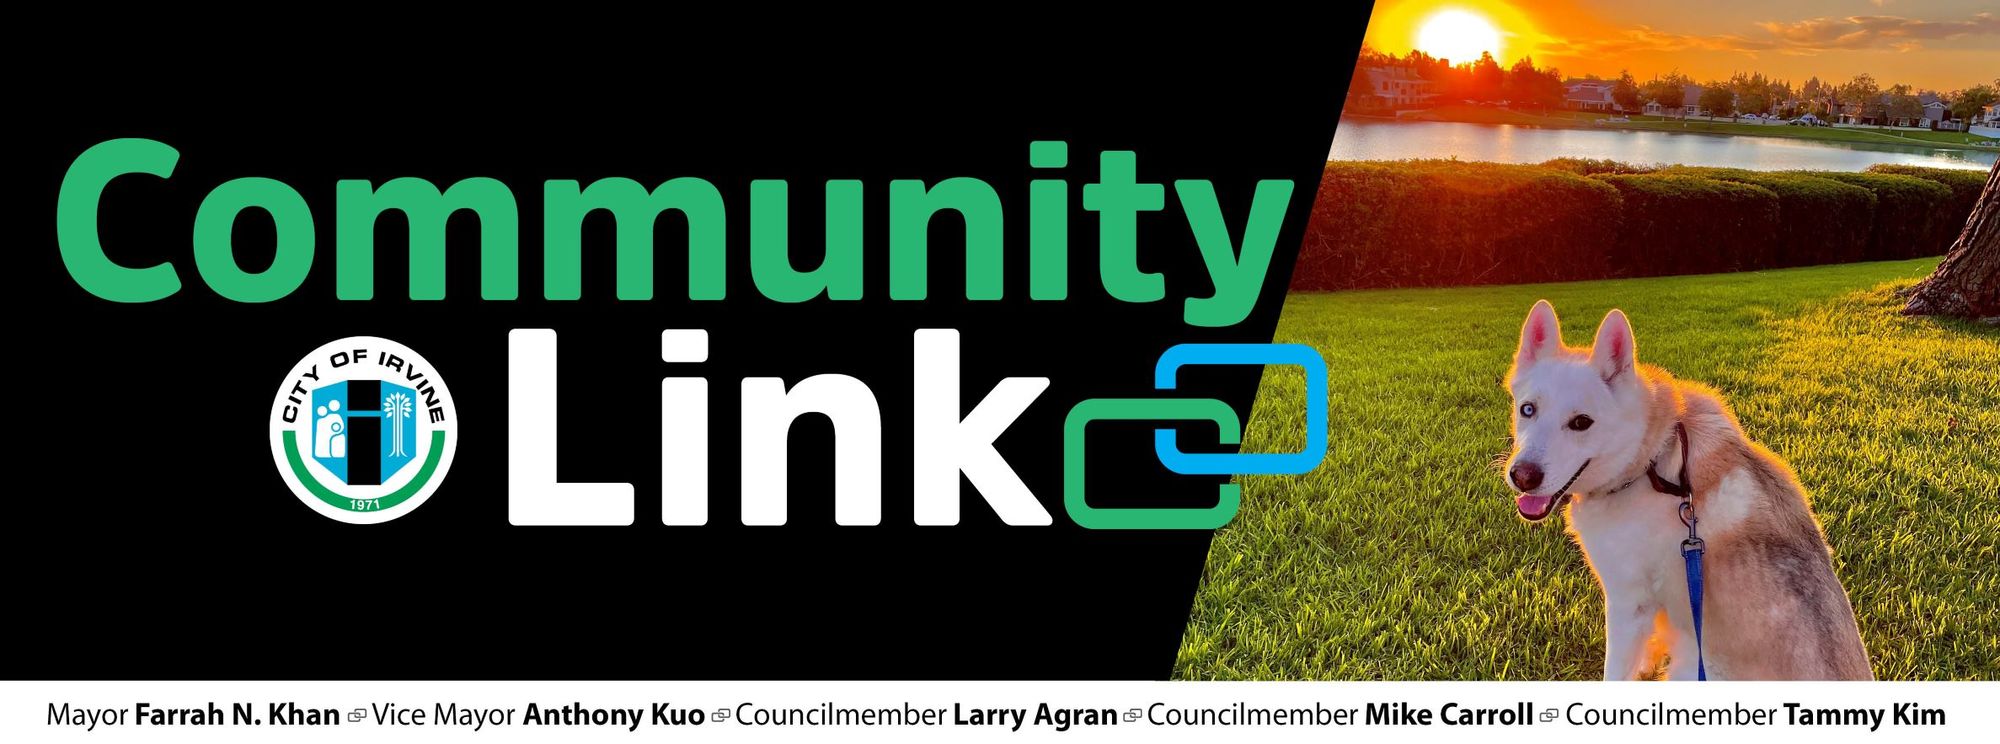 Community Link March 18